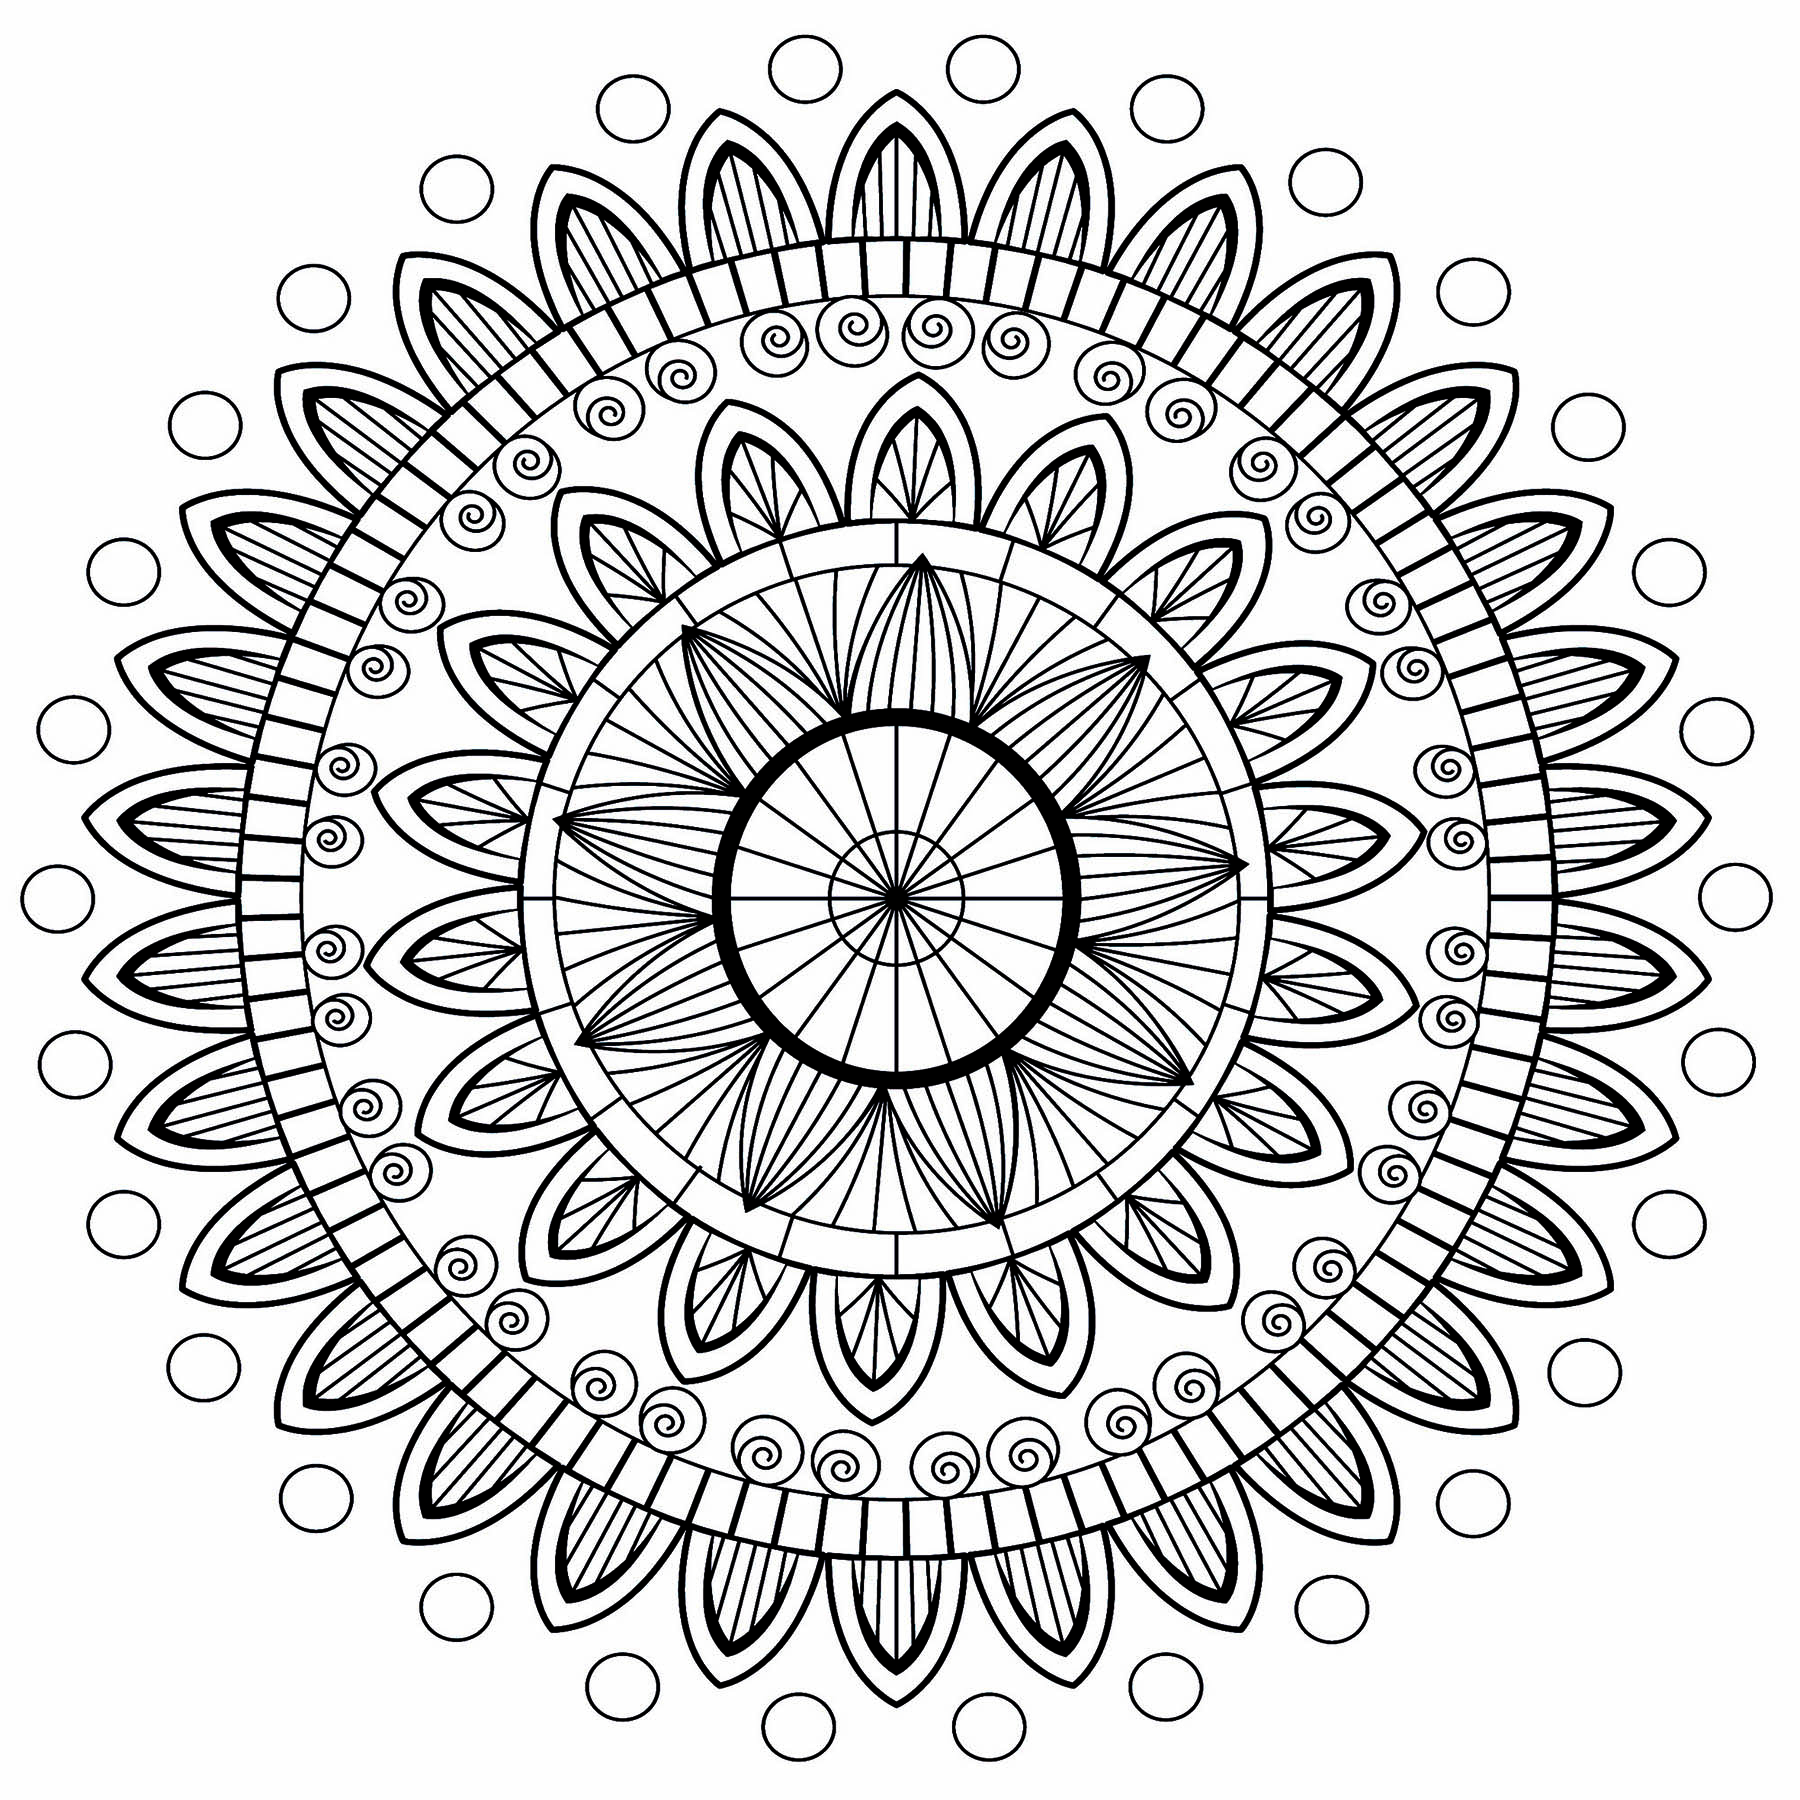 A beautiful Mandala with petals on several levels, and circles at the ends, Artist : Bénédicte